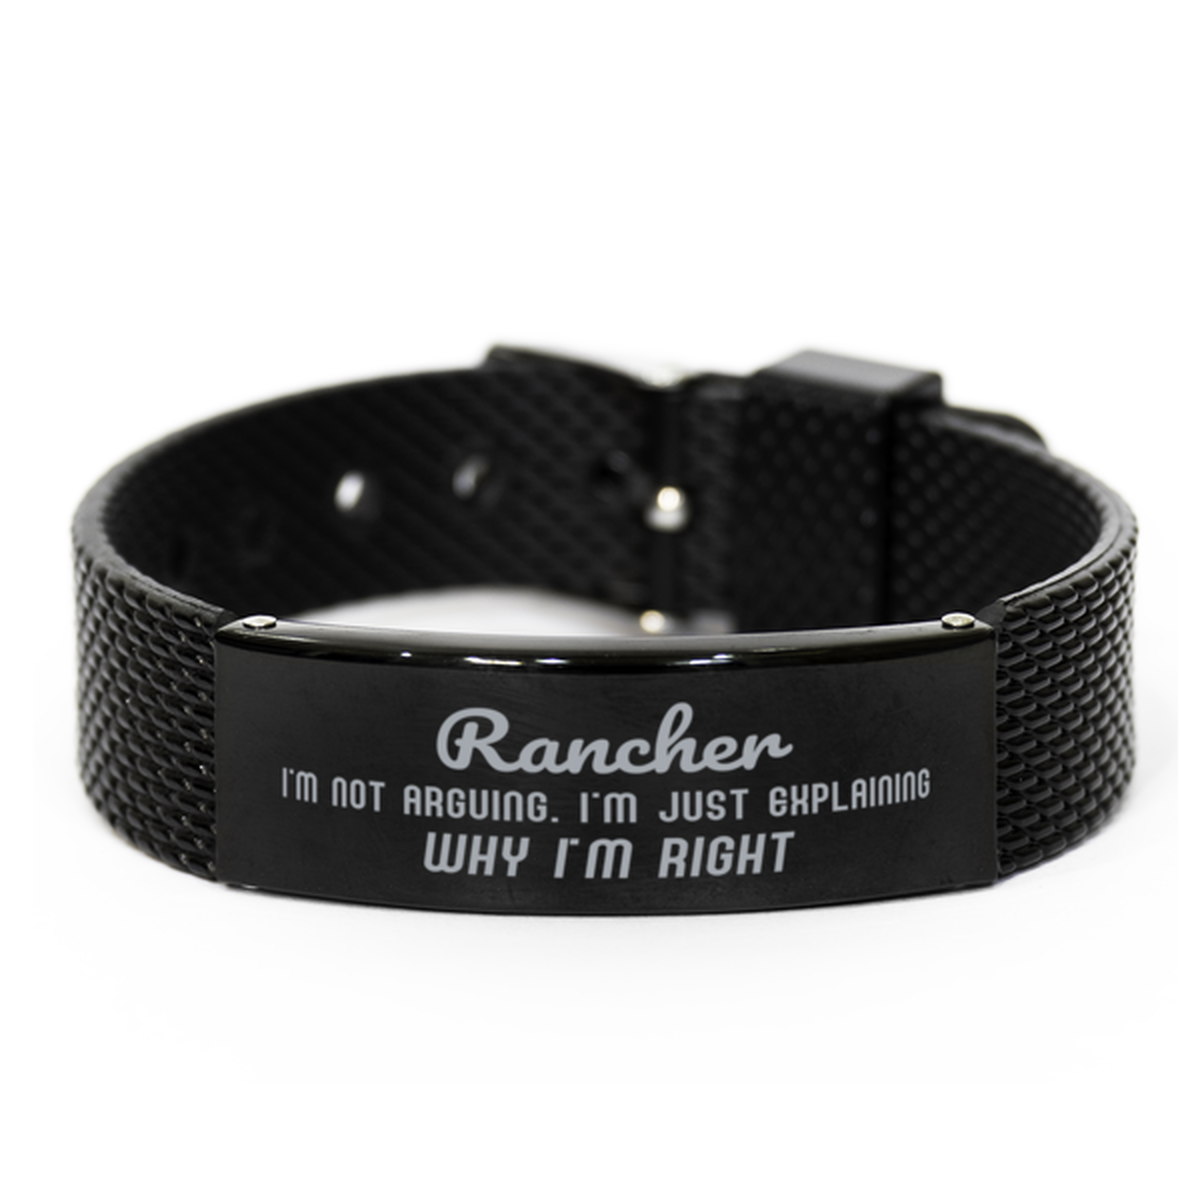 Rancher I'm not Arguing. I'm Just Explaining Why I'm RIGHT Black Shark Mesh Bracelet, Funny Saying Quote Rancher Gifts For Rancher Graduation Birthday Christmas Gifts for Men Women Coworker